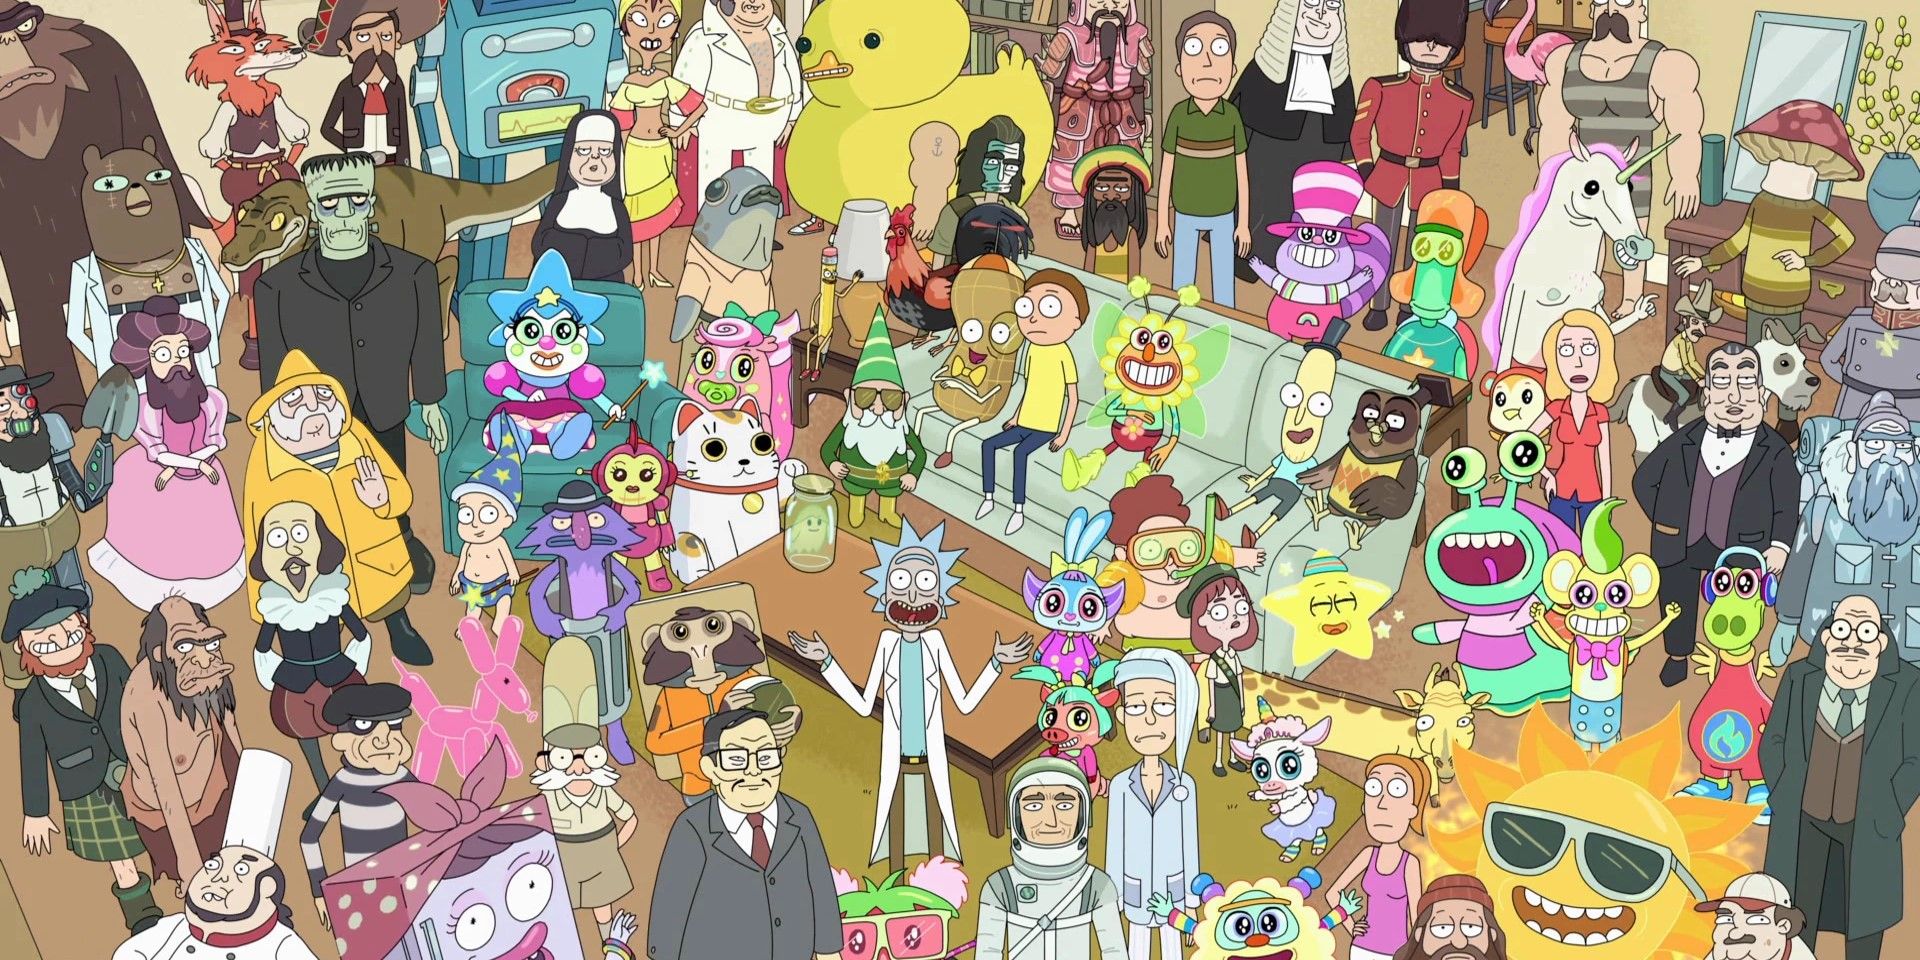 The characters from Rick and Morty surrounded by colourful characters in 'Total Rickall'